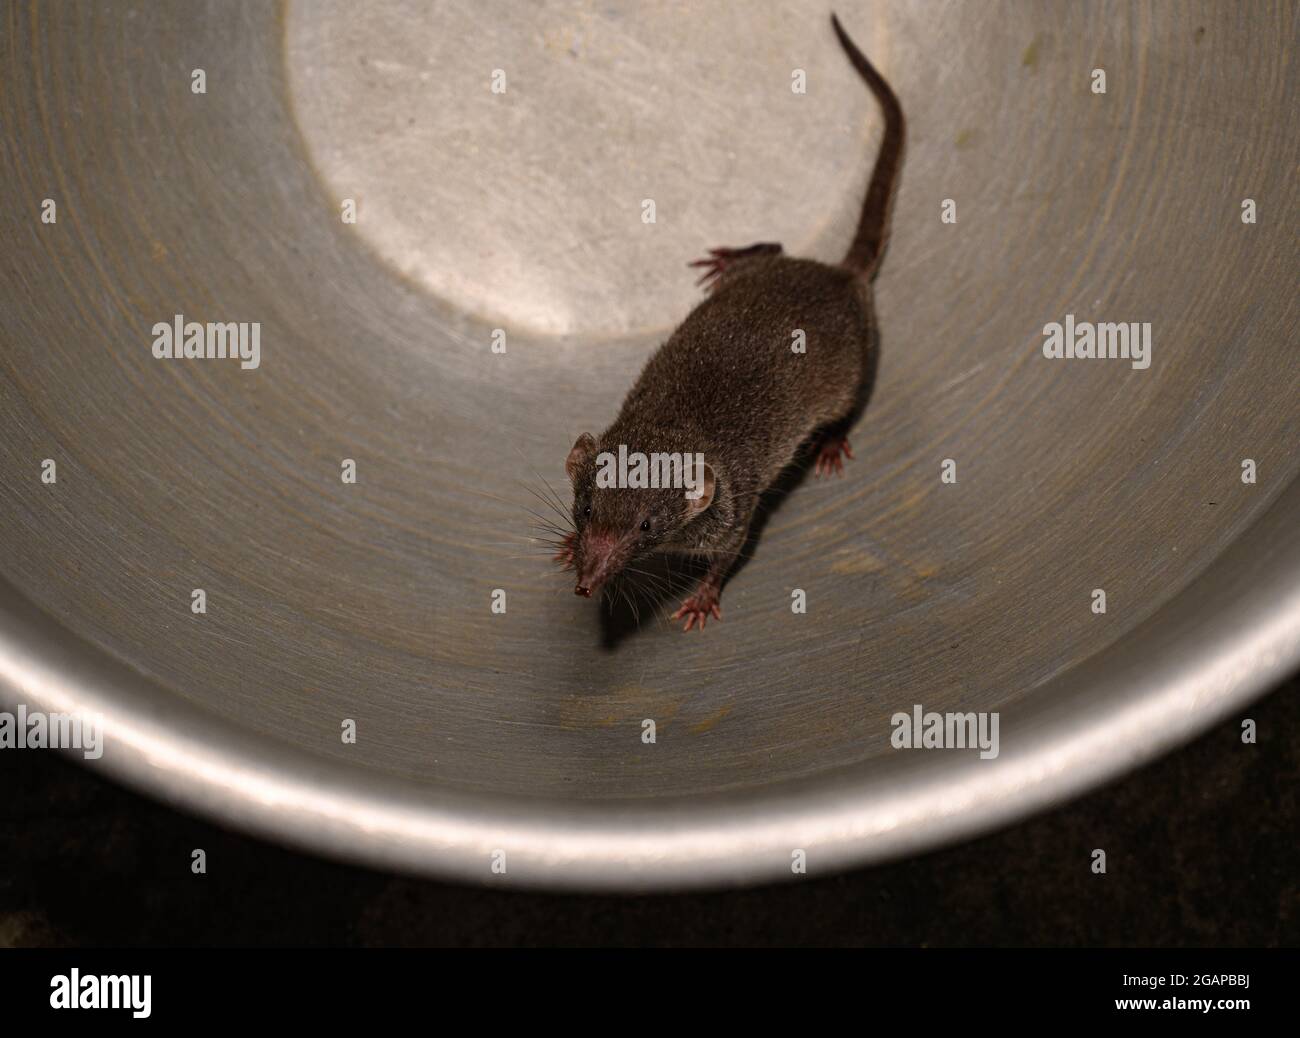 The Asian house shrew (Suncus murinus) is found mainly in South Asia but  introduced widely throughout Asia and eastern Africa. As it runs it makes a chattering  sound that resembles the sound